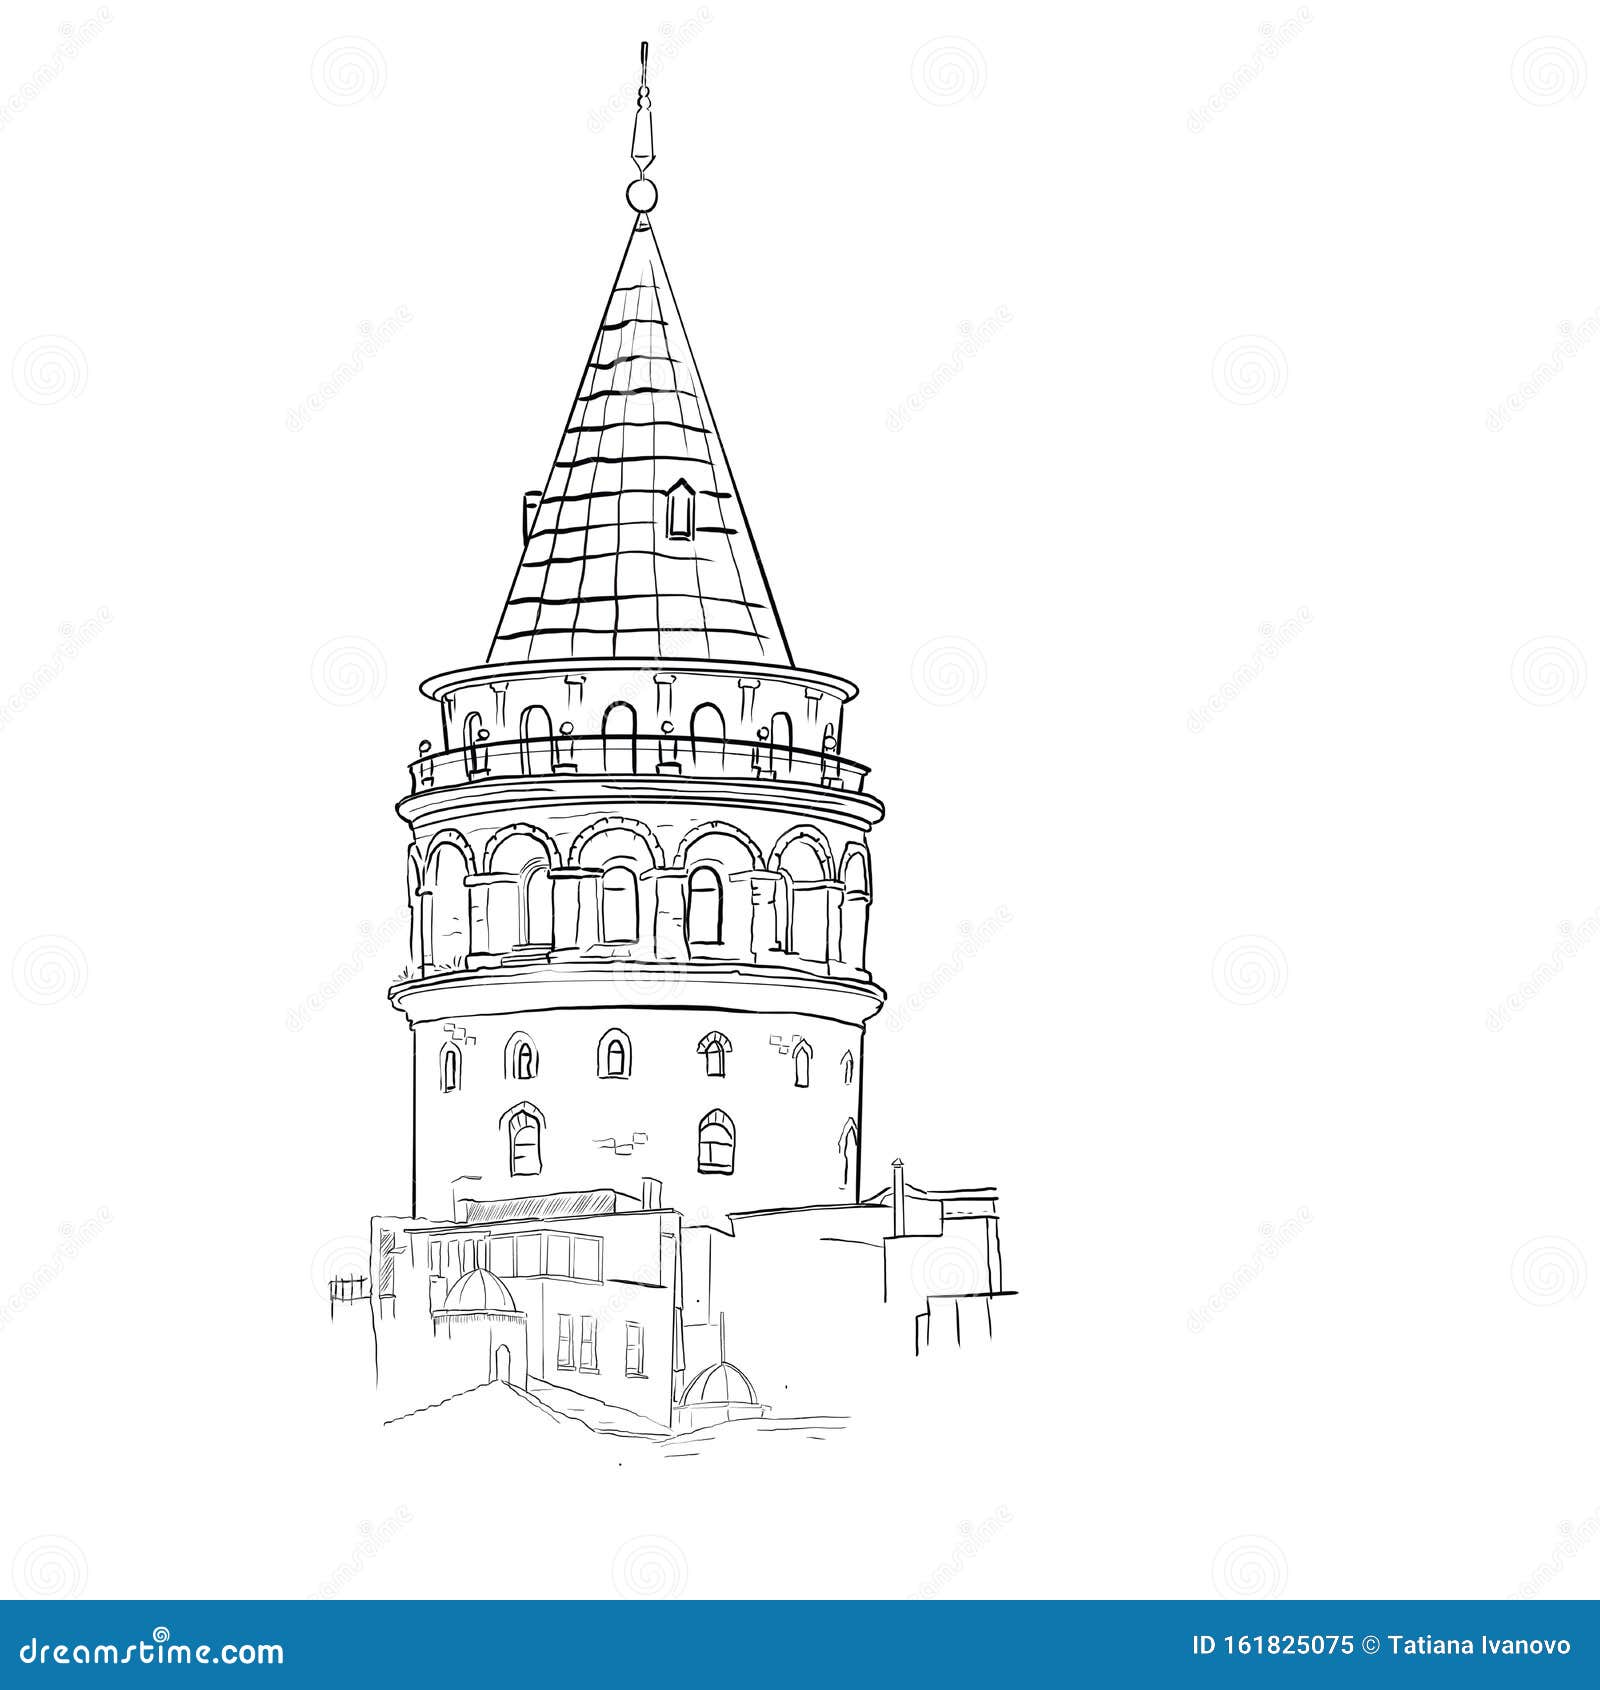  sketch with the silhouette of the galata tower in istanbul.  black contour on a white background.